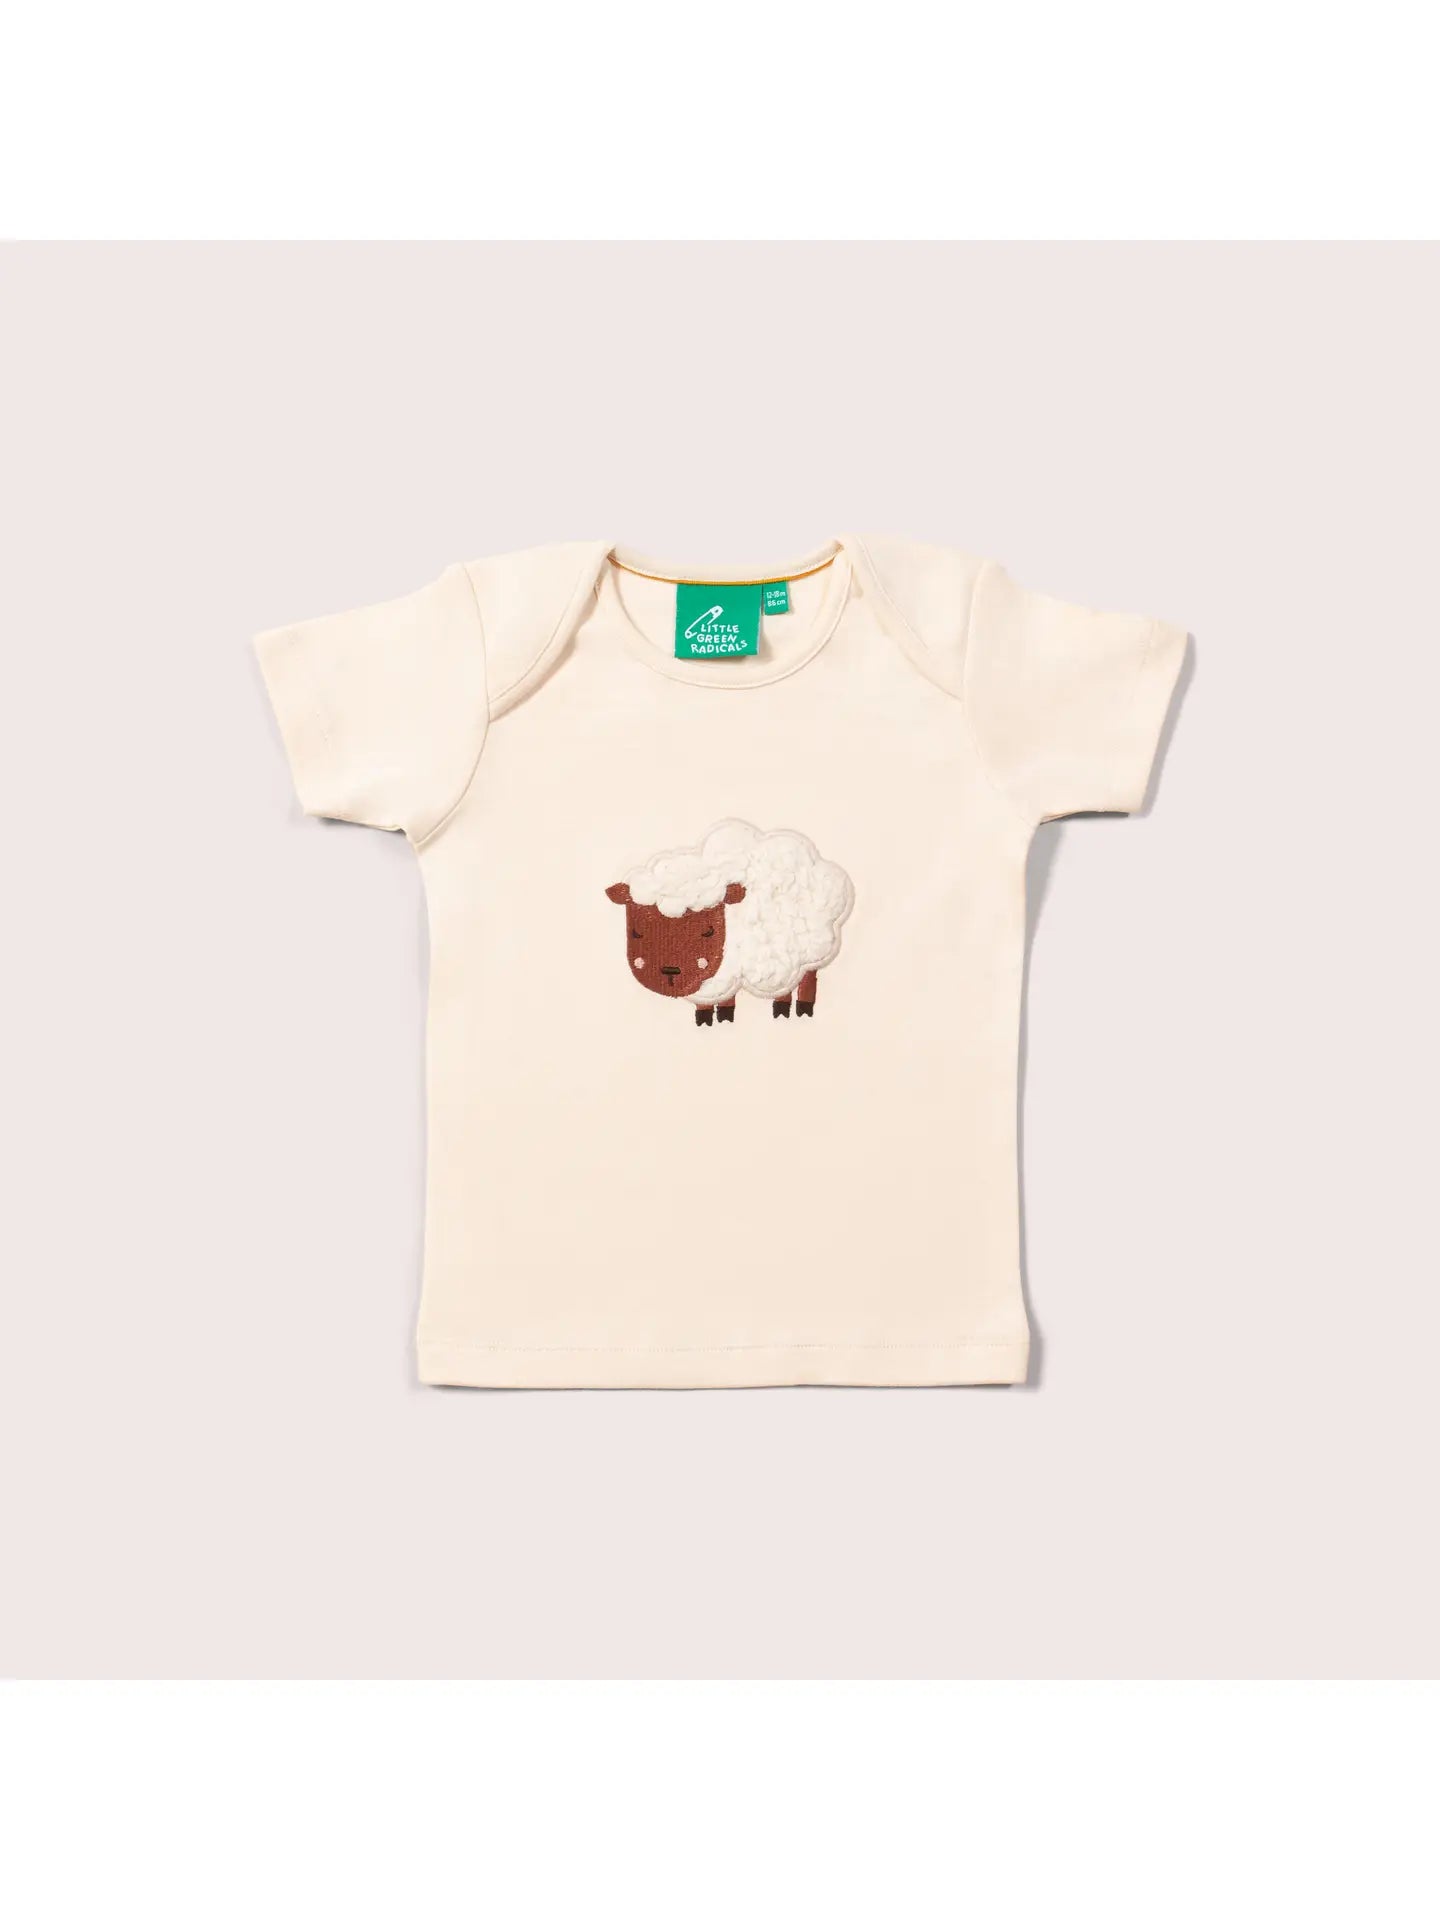 Counting Sheep Applique T-Shirt